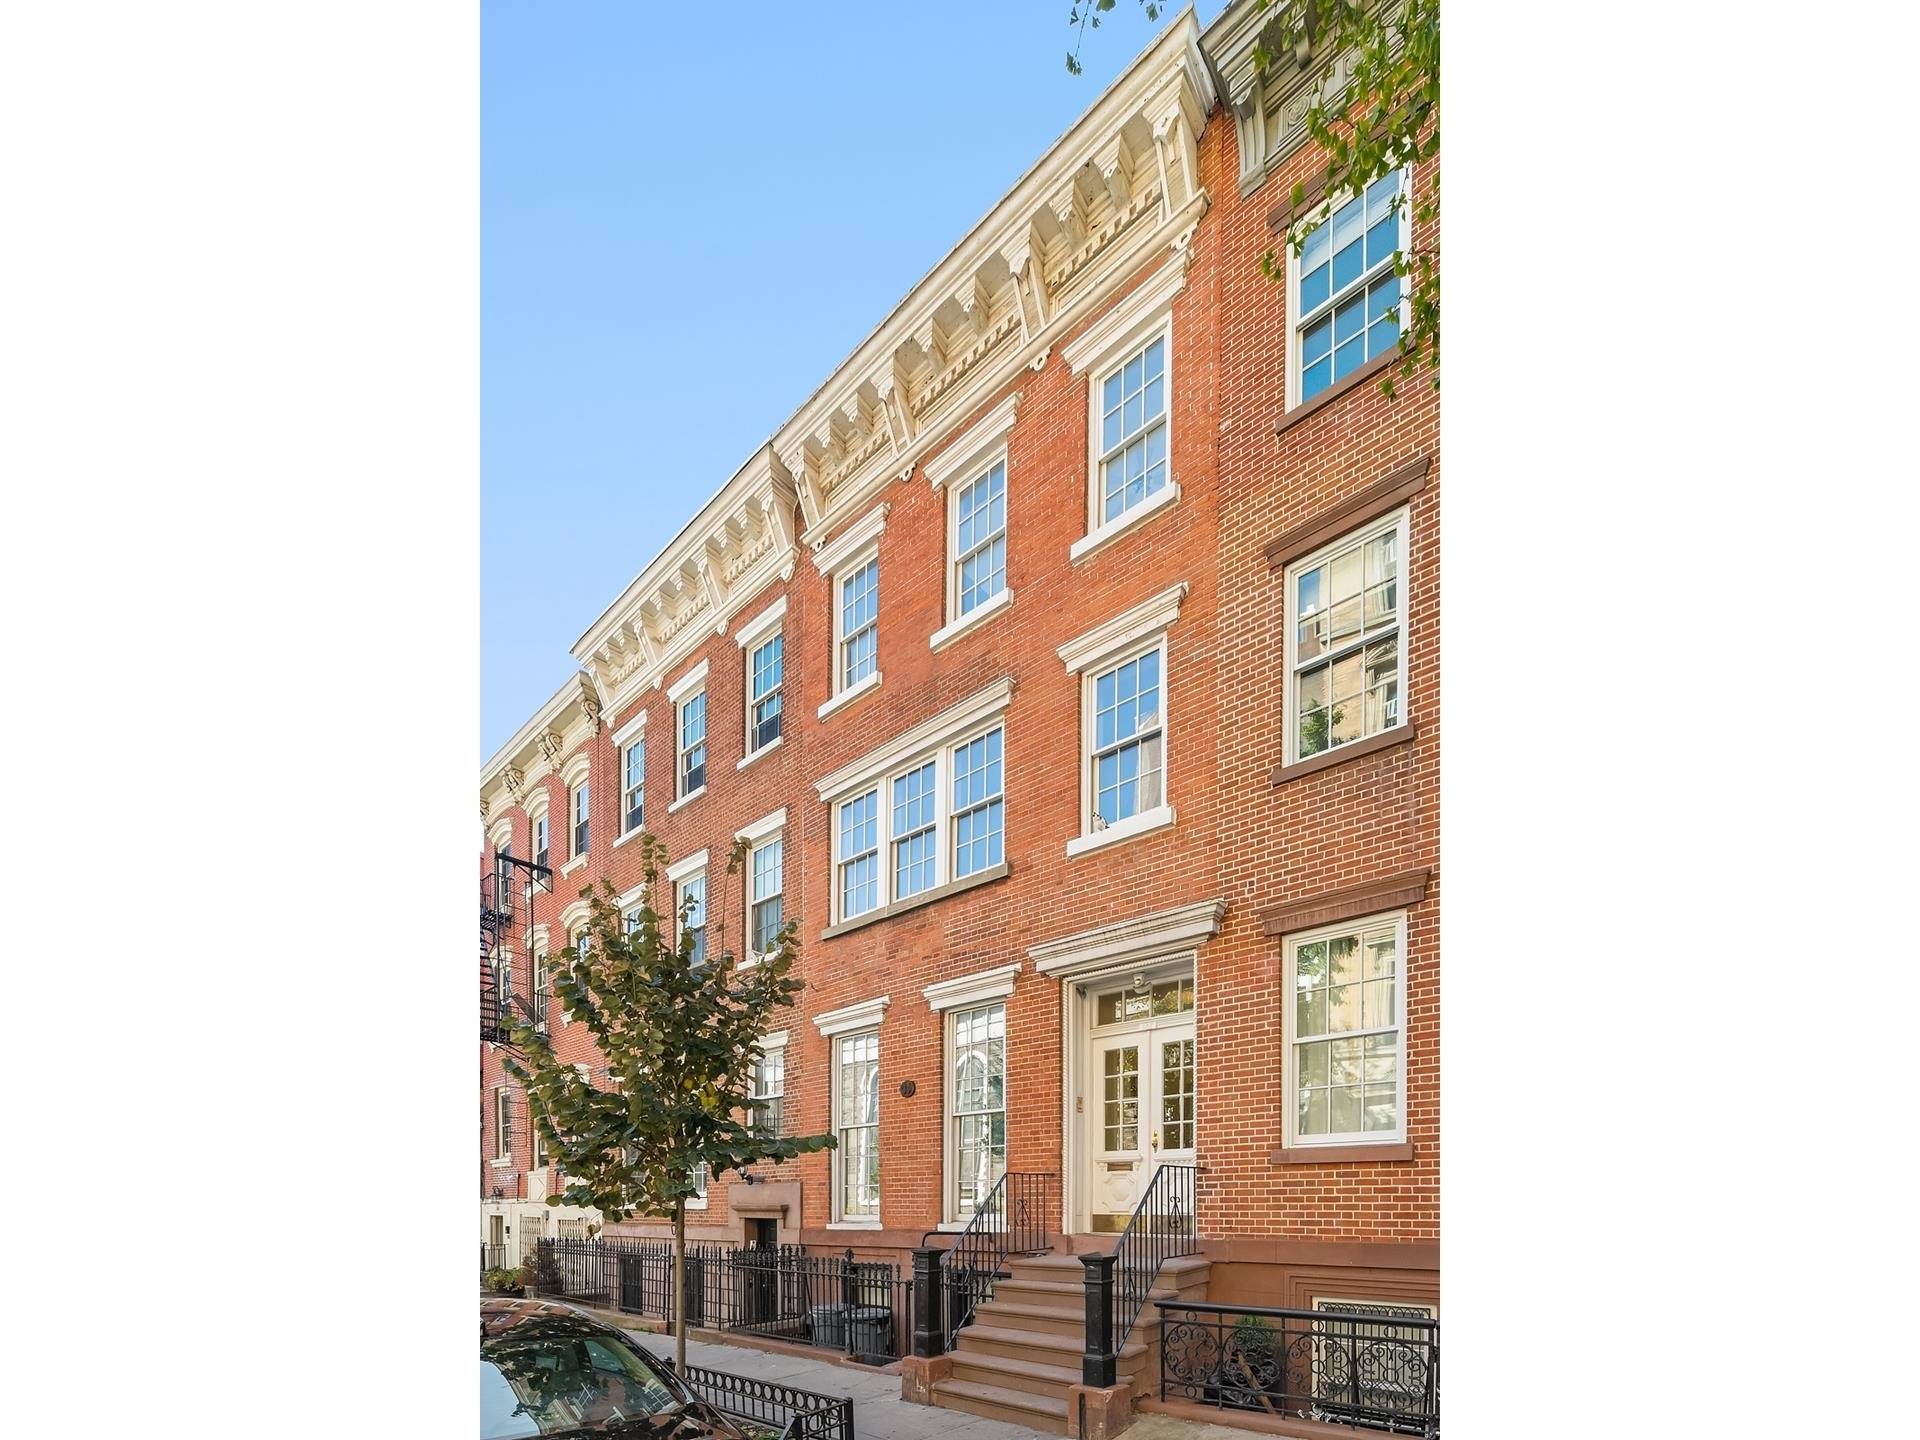 Co-op Properties for Sale at 108 W WASHINGTON PL, 1 West Village, New York, NY 10014